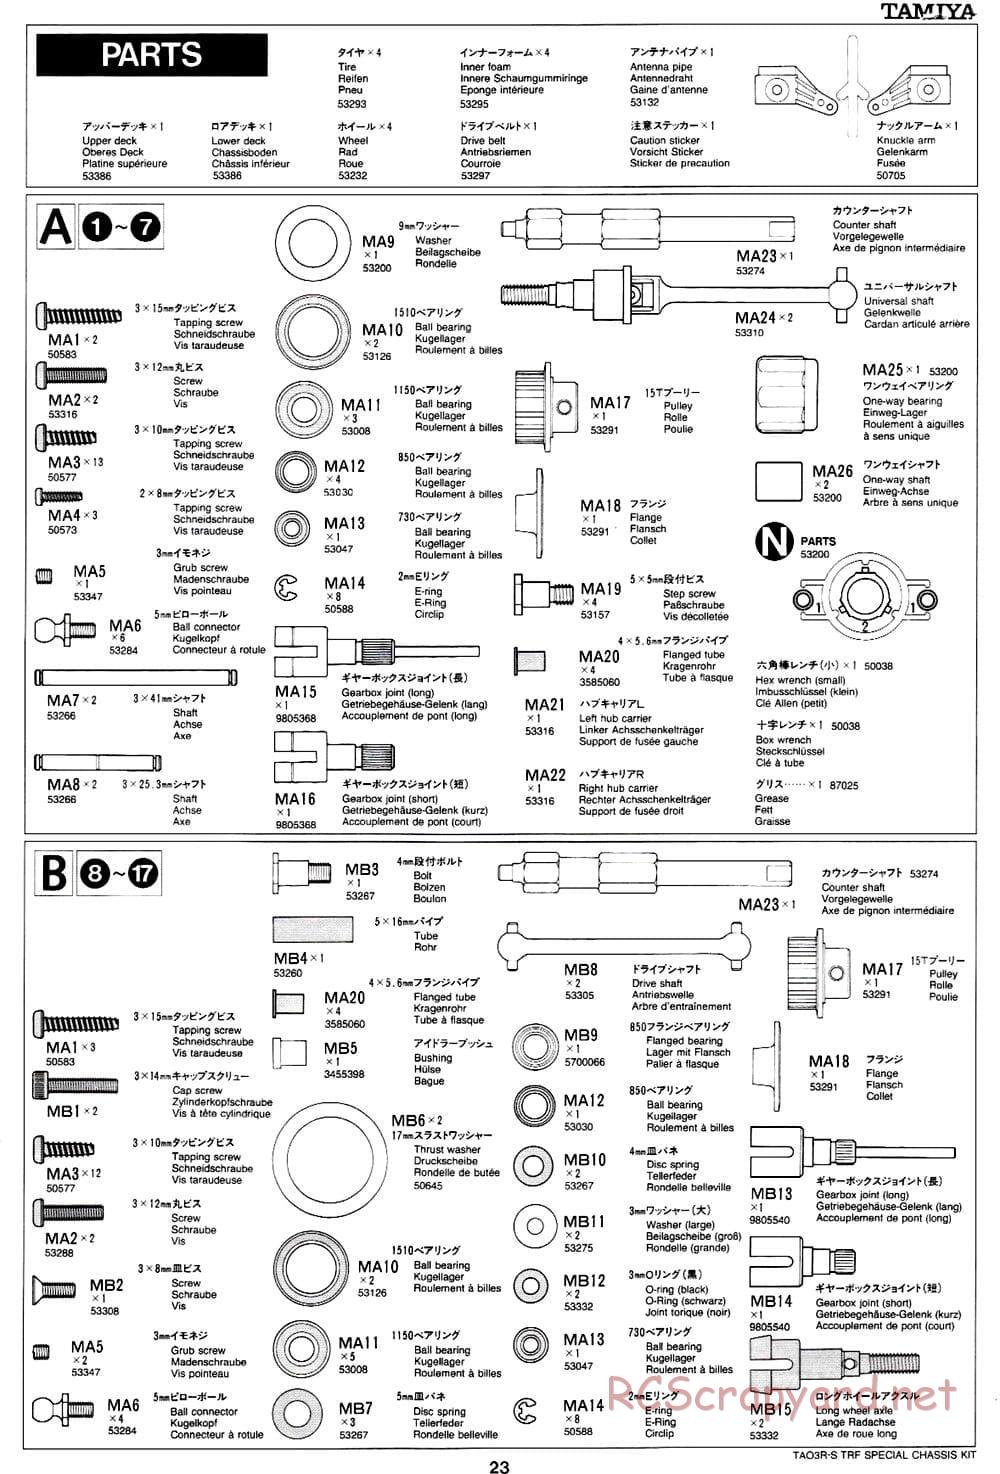 Tamiya - TA-03RS TRF Special Chassis - Manual - Page 23